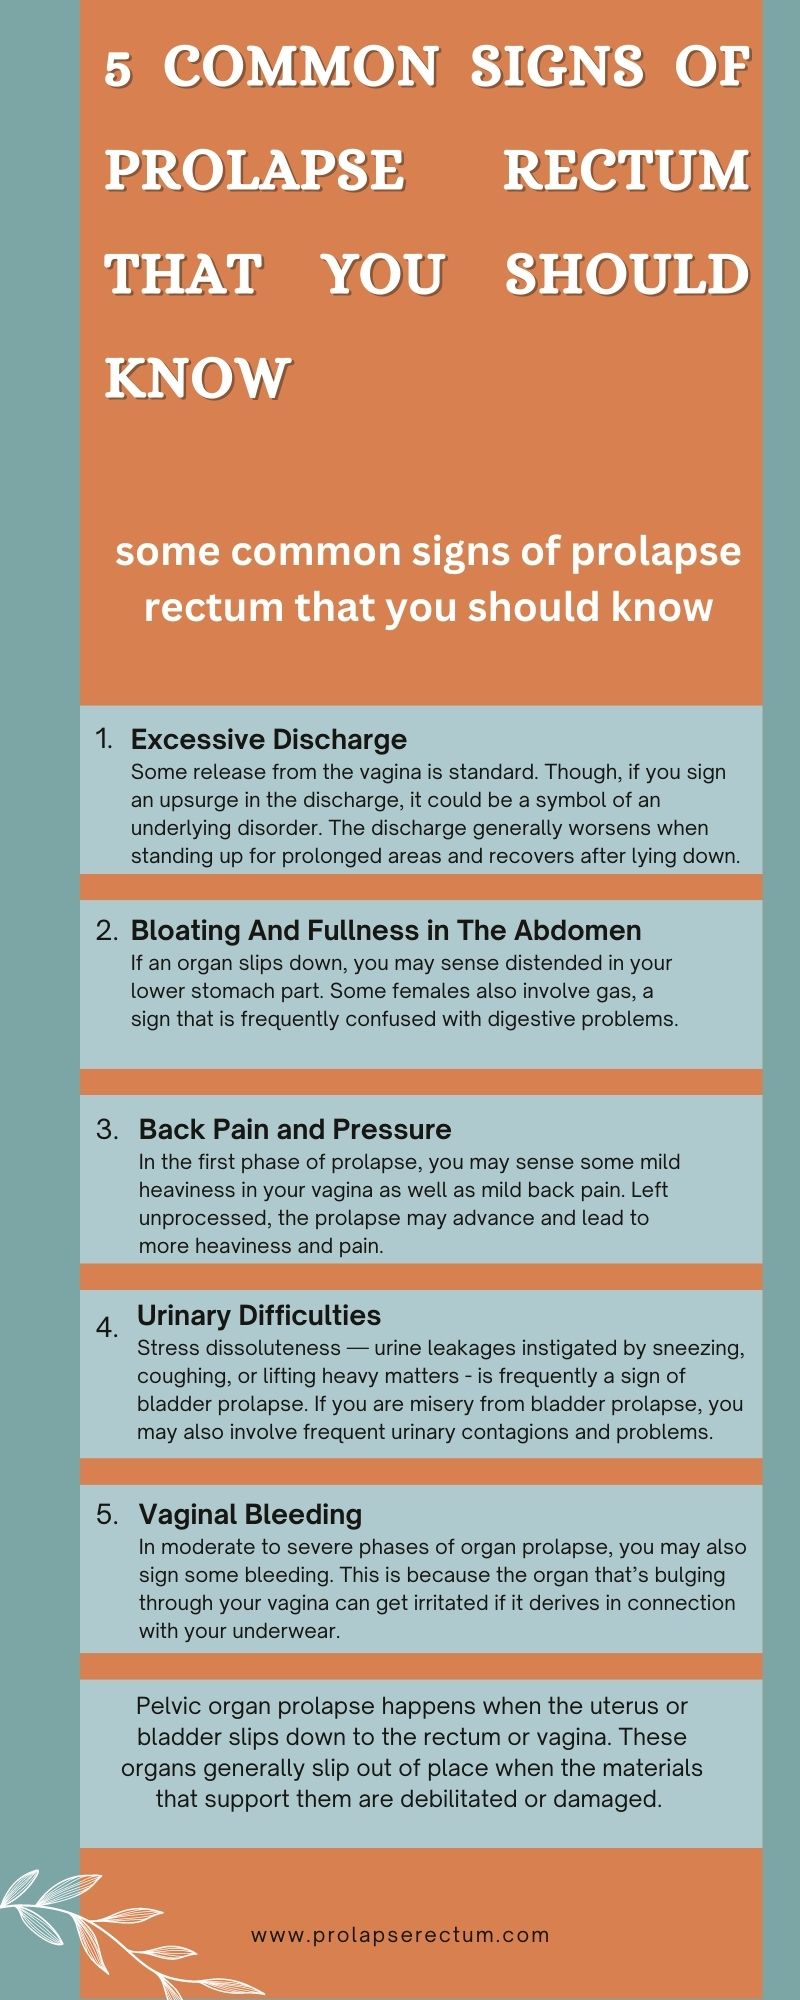 5 Common Signs of Prolapse Rectum that You Should Know